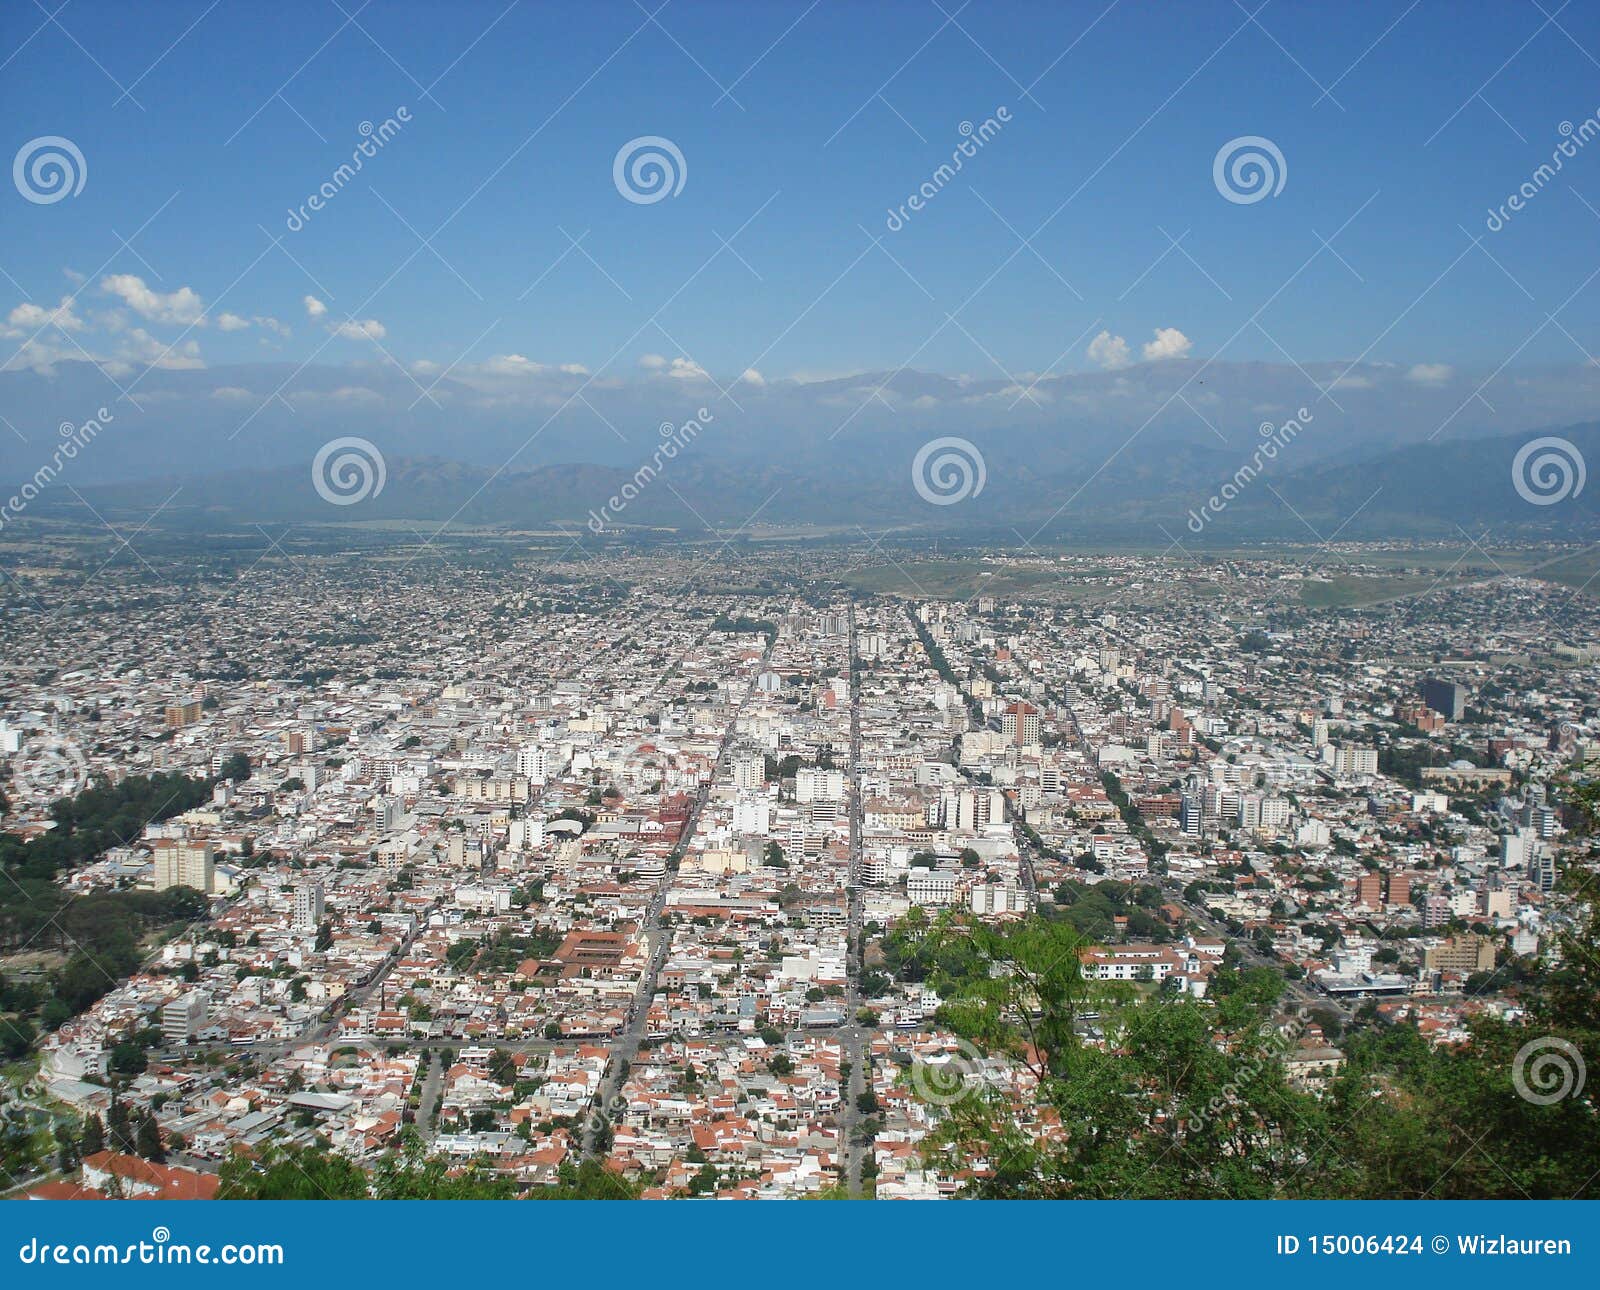 view over the city of salta (argentina)